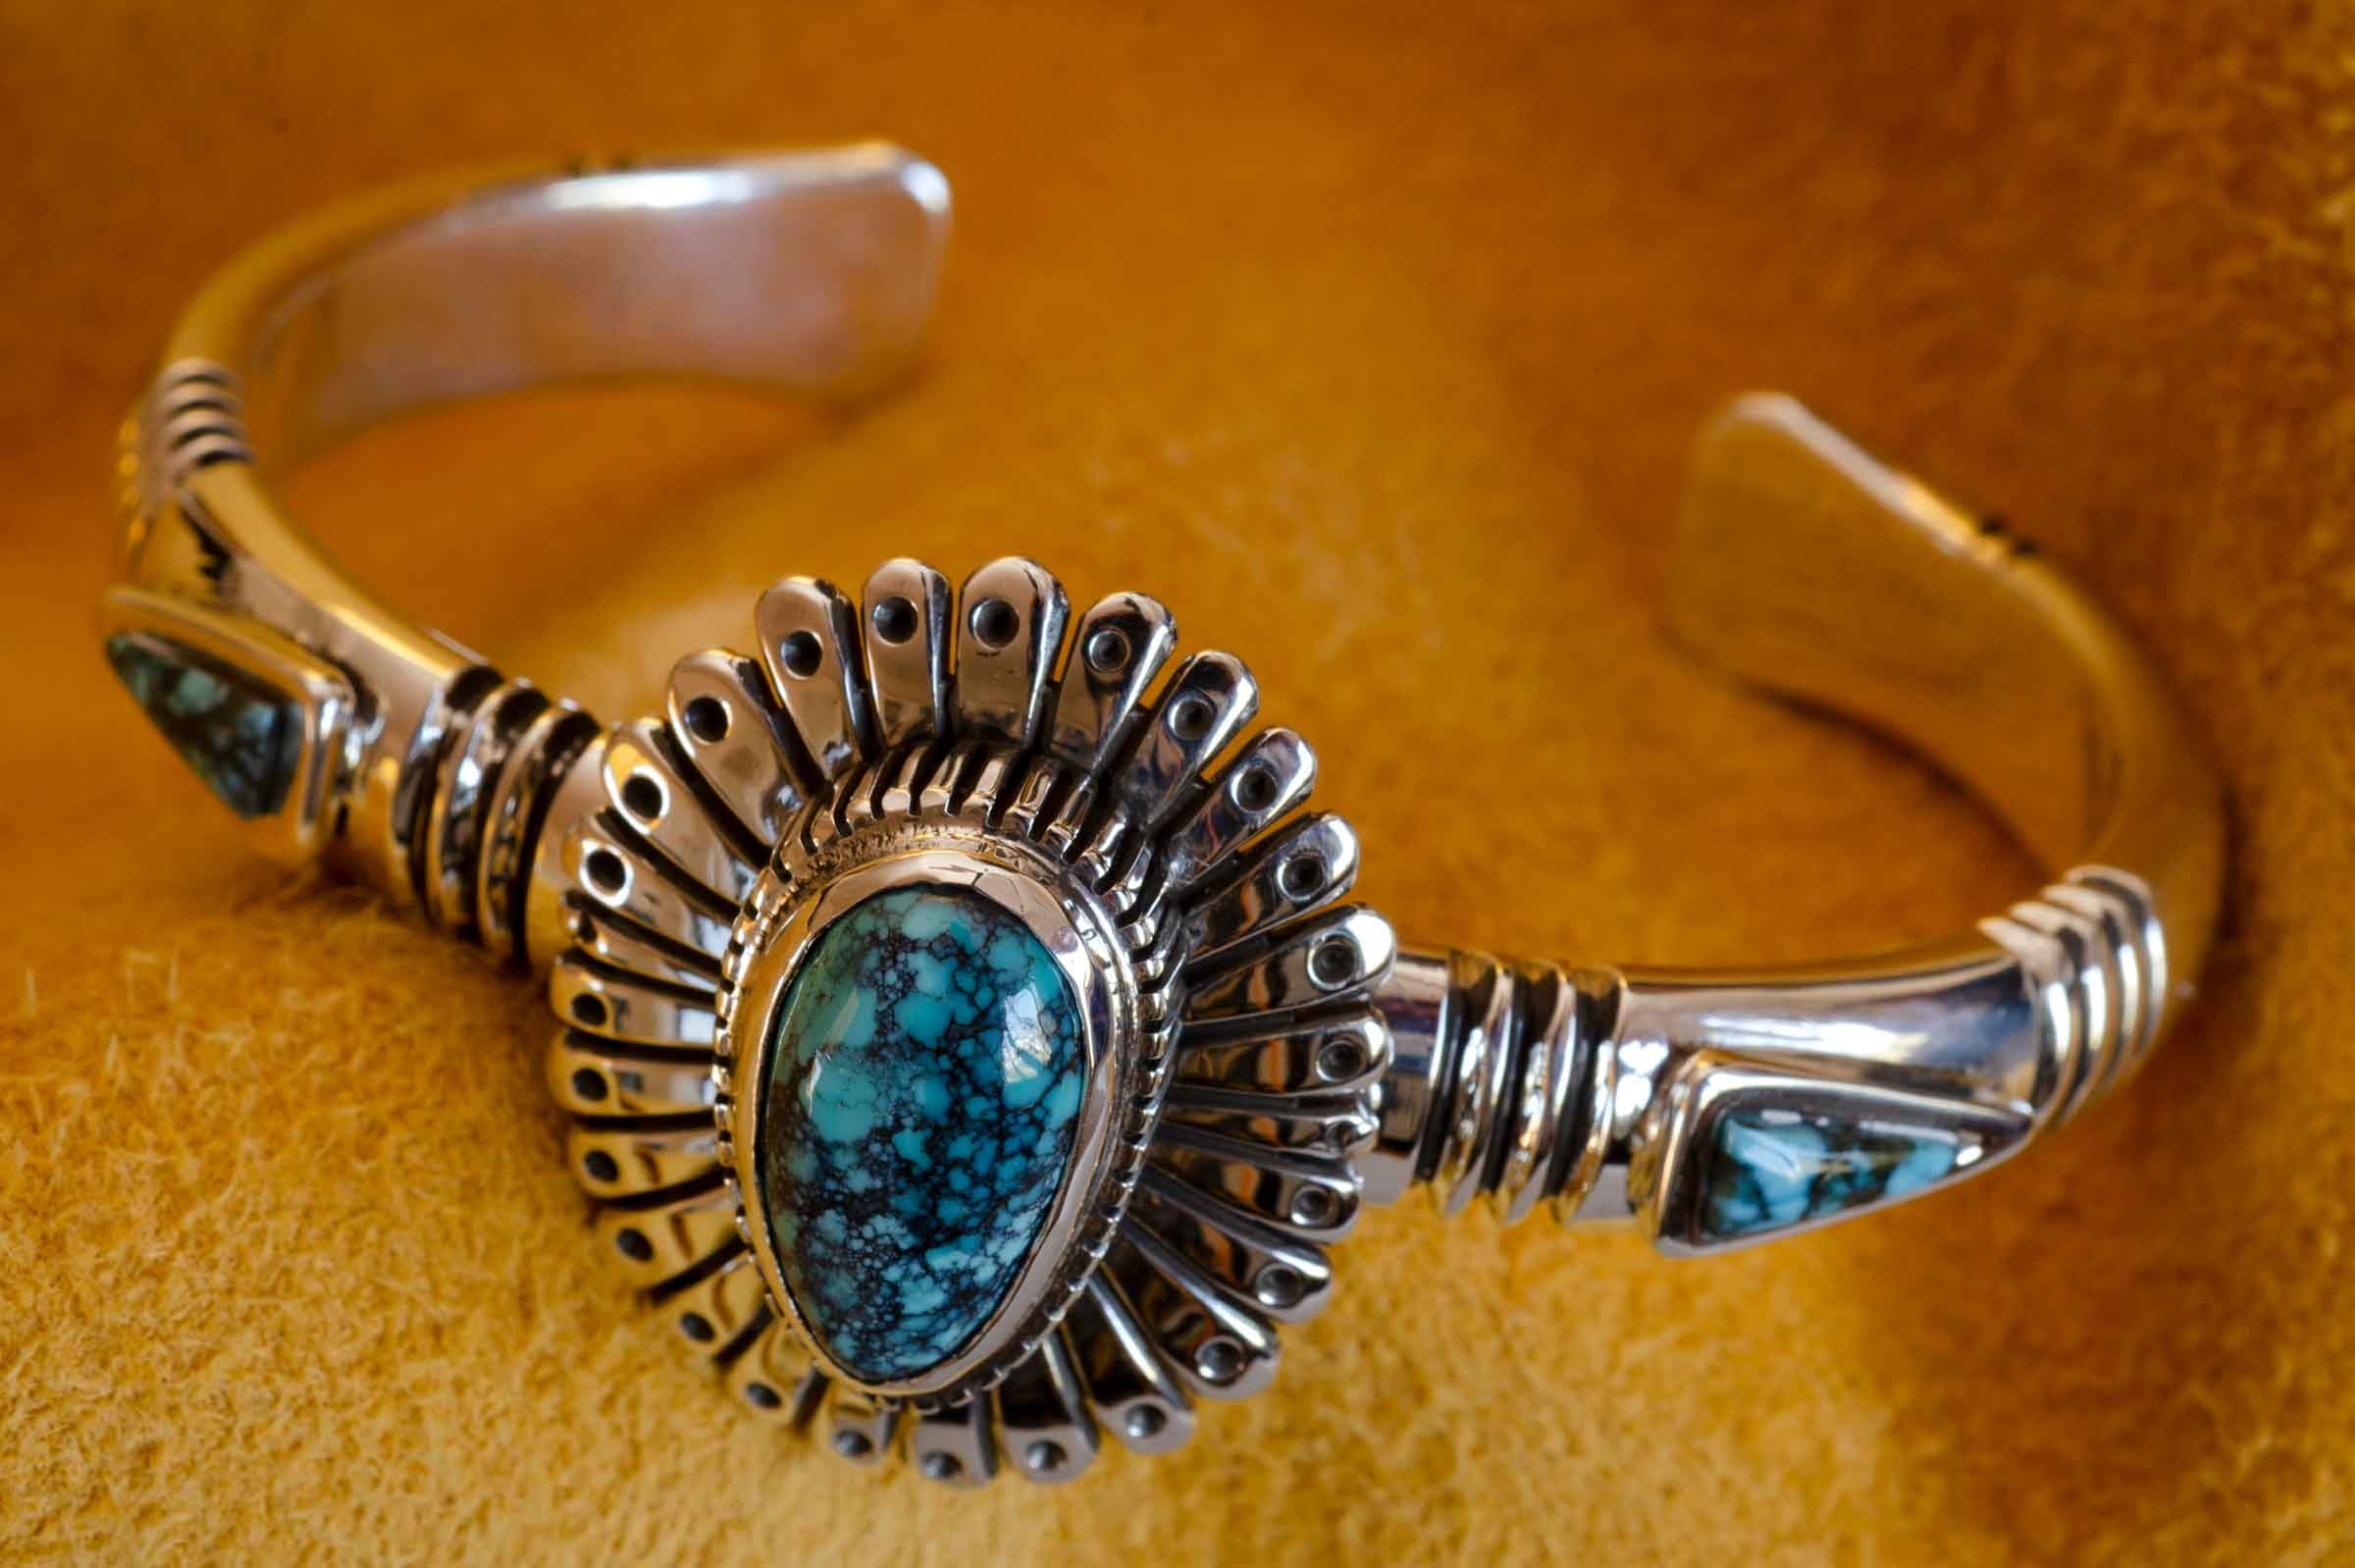 Jay Livingston, Lone Mountain Turquoise and Silver Bracelet